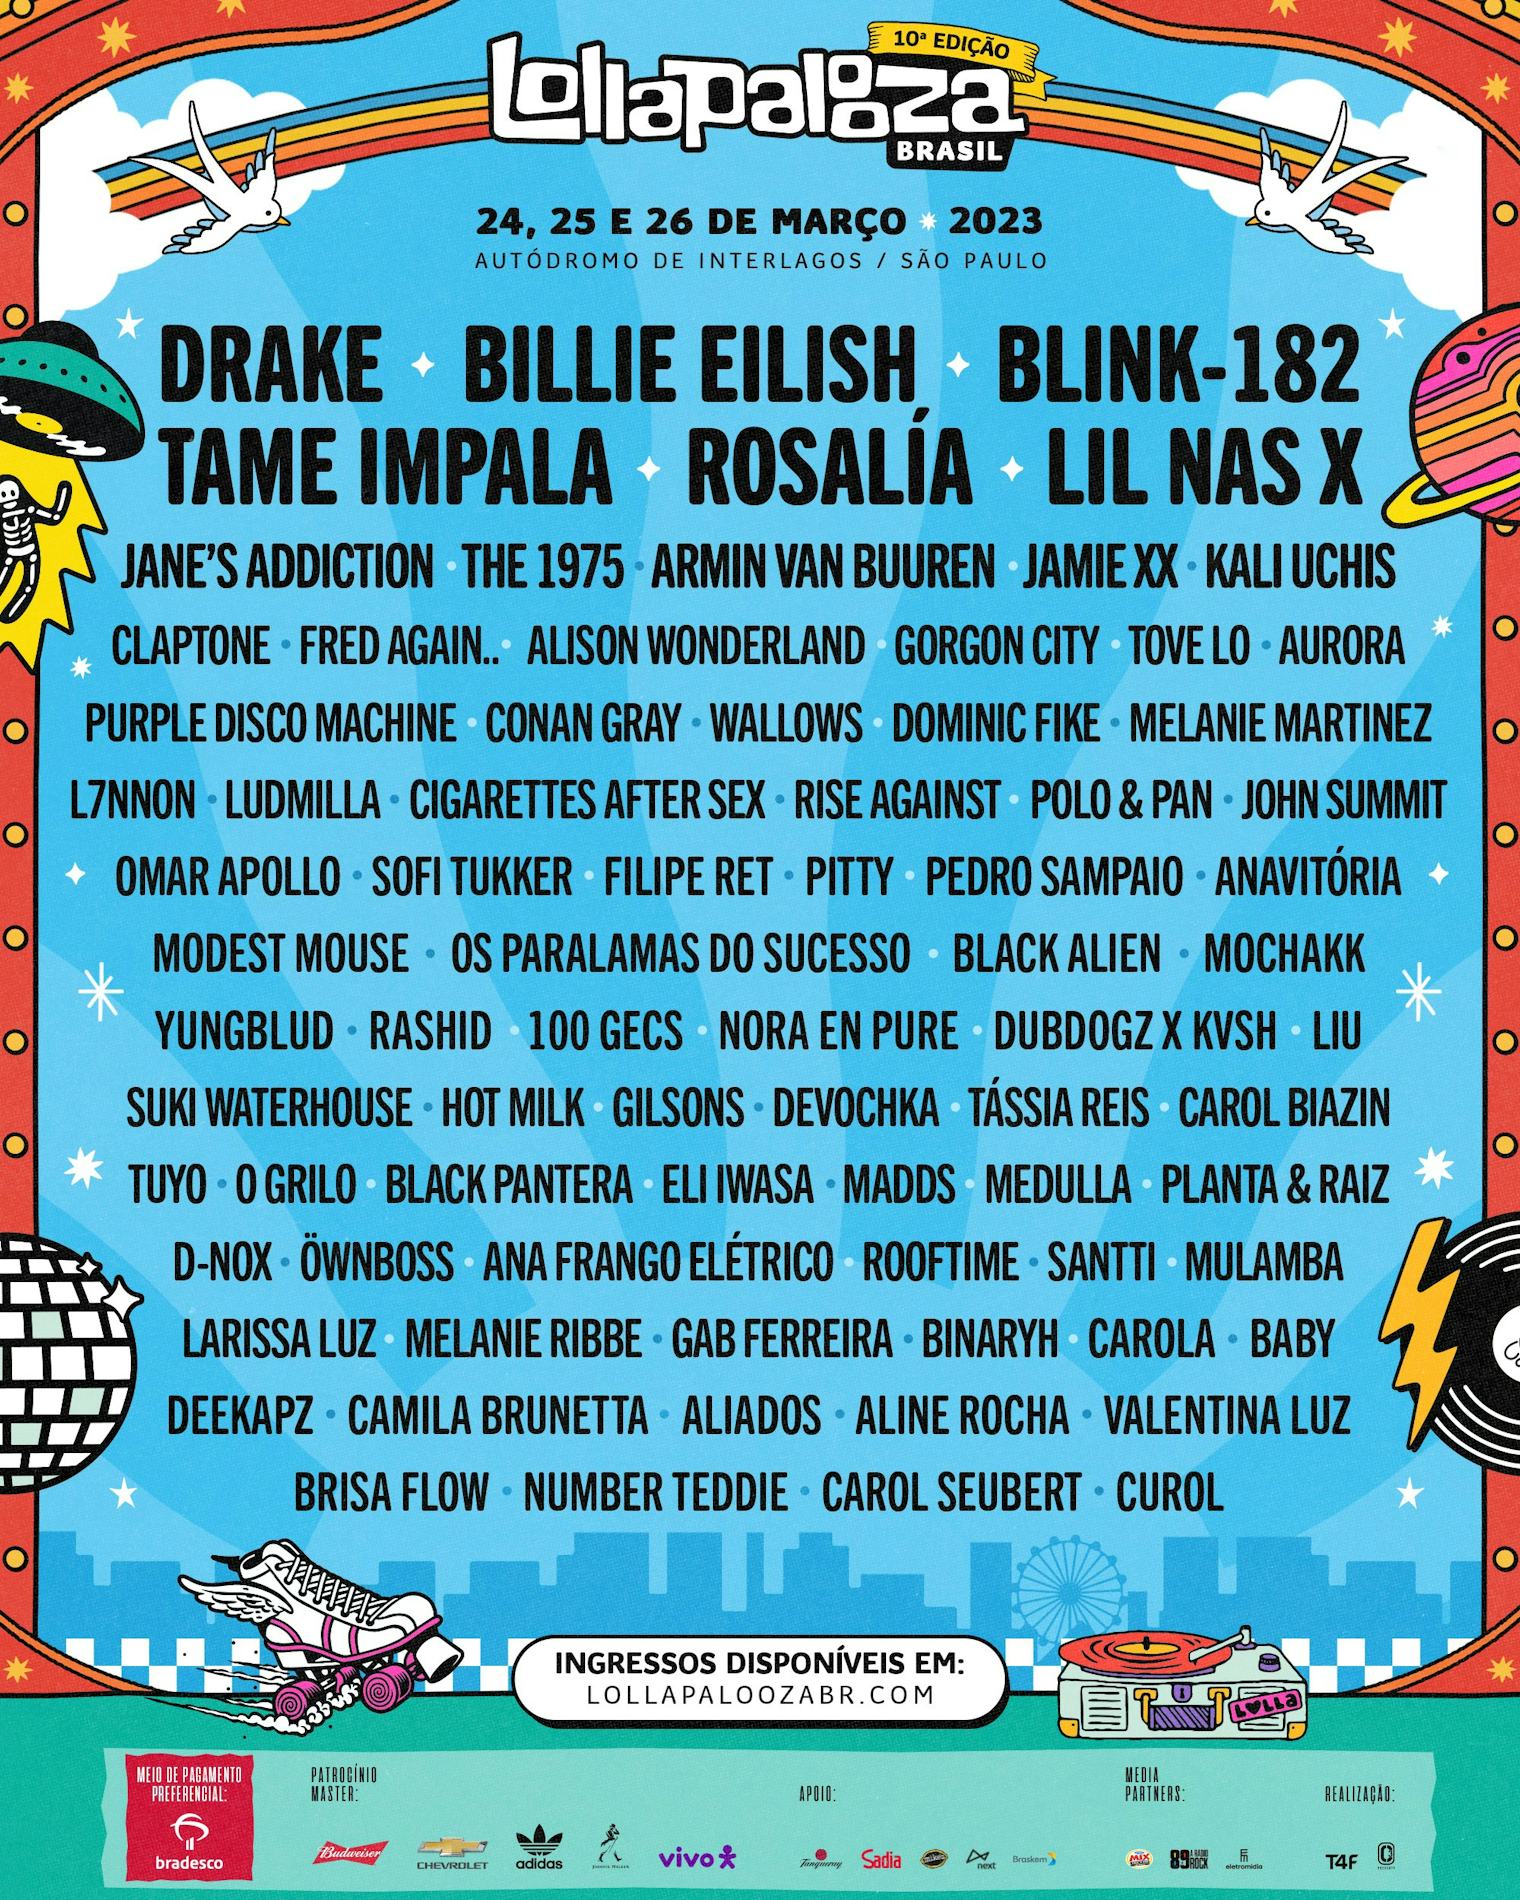 Lollapalooza's 2023 South America Lineup Includes Drake, Blink182